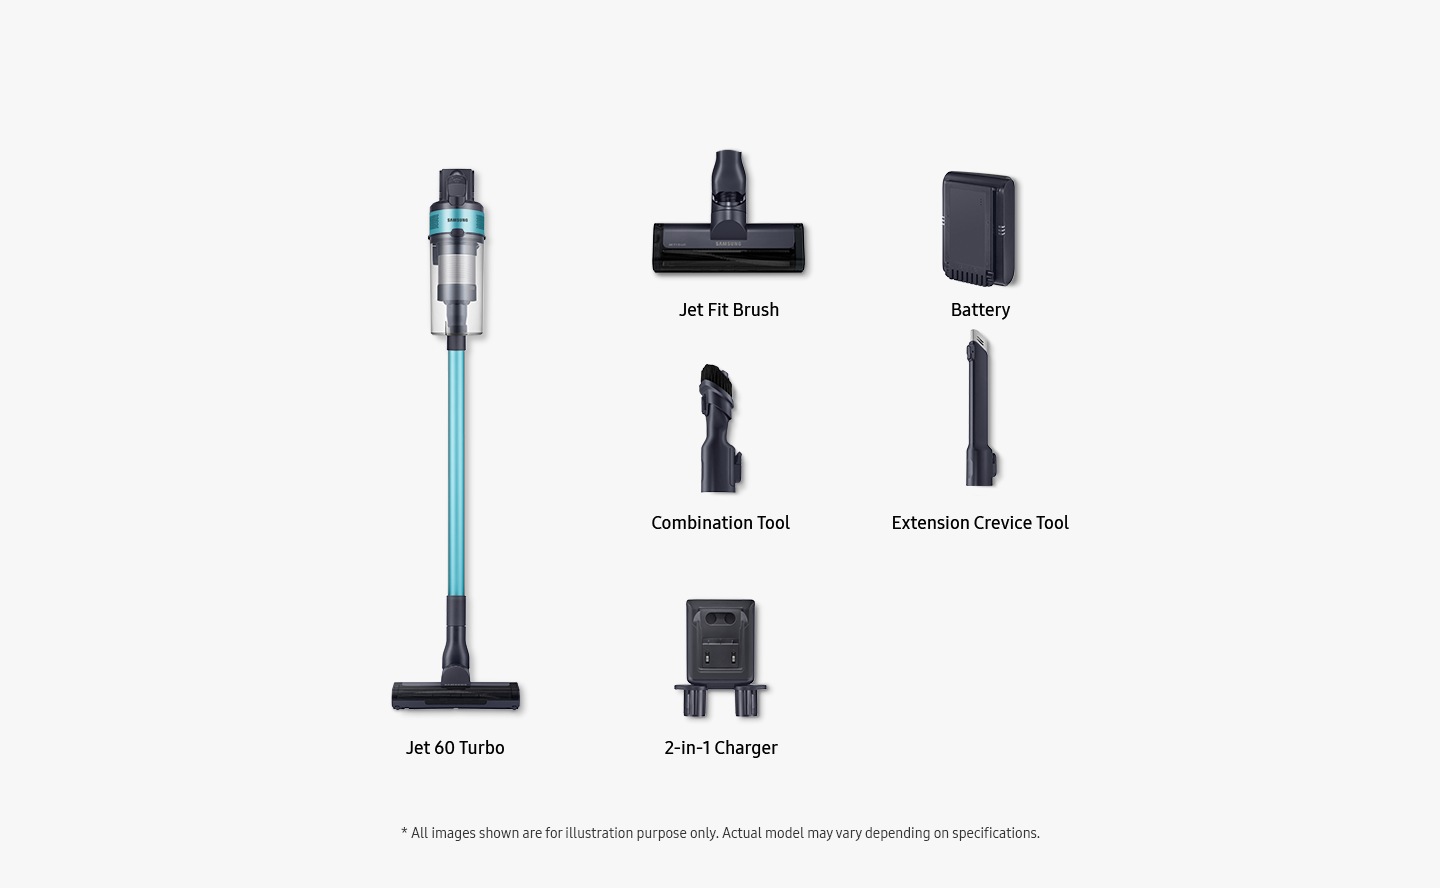 Items included inbox shown: Jet 60 Turbo, jet fit brush, battery, combination tool, extension crevice tool and 2-in-1 charger.All images shown are for illustration purpose only. Actual model may vary depending on specifications.